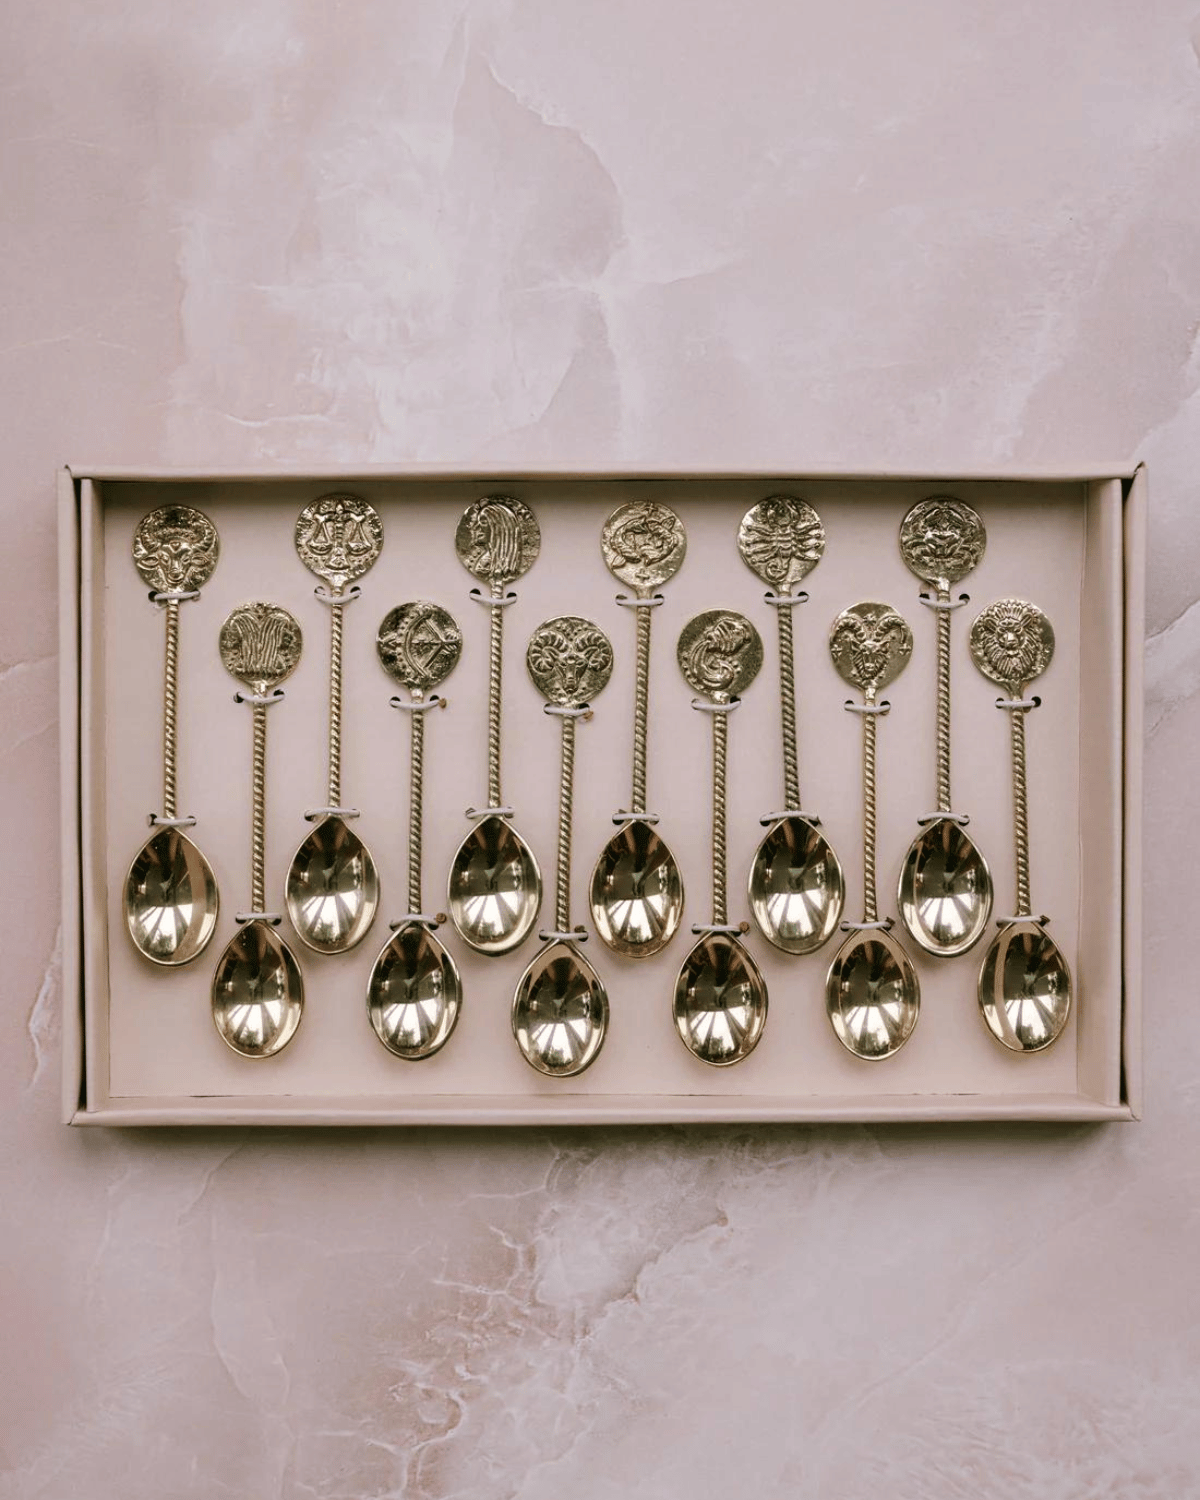 Zodiac Collection Teaspoons (12pc) by The Wholesome Store 🌻